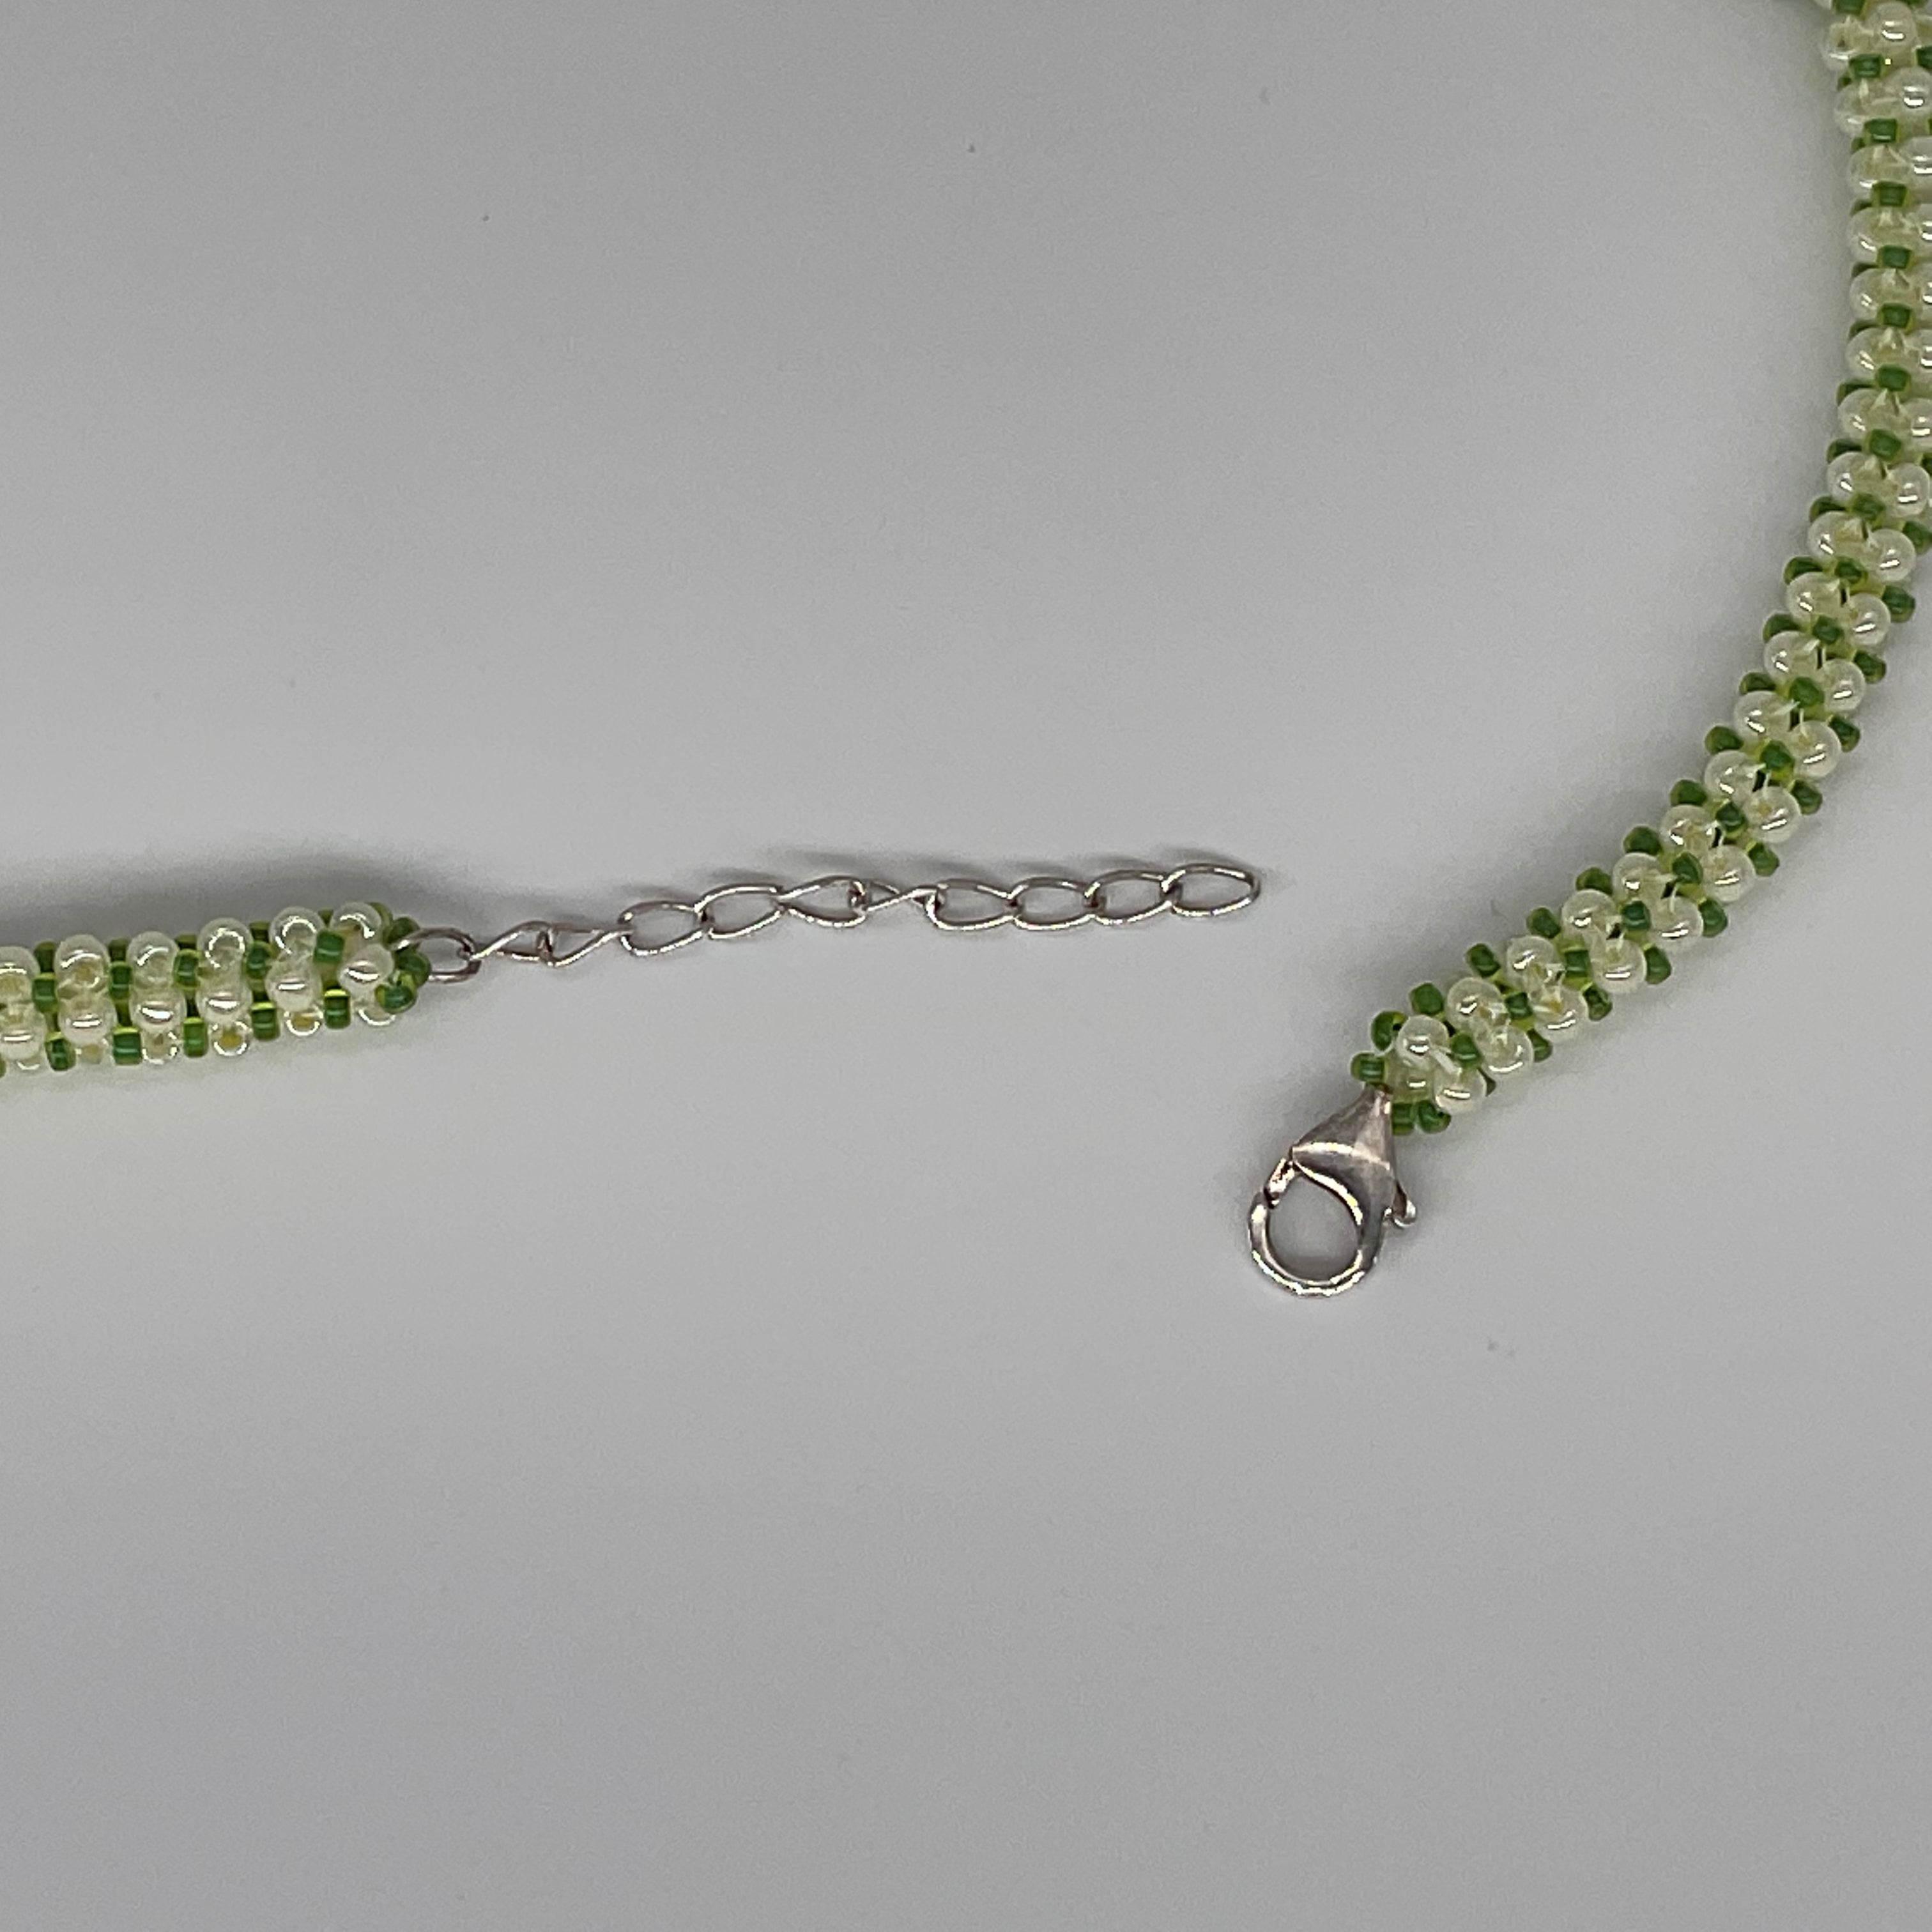 Green and White Seed Bead Necklace